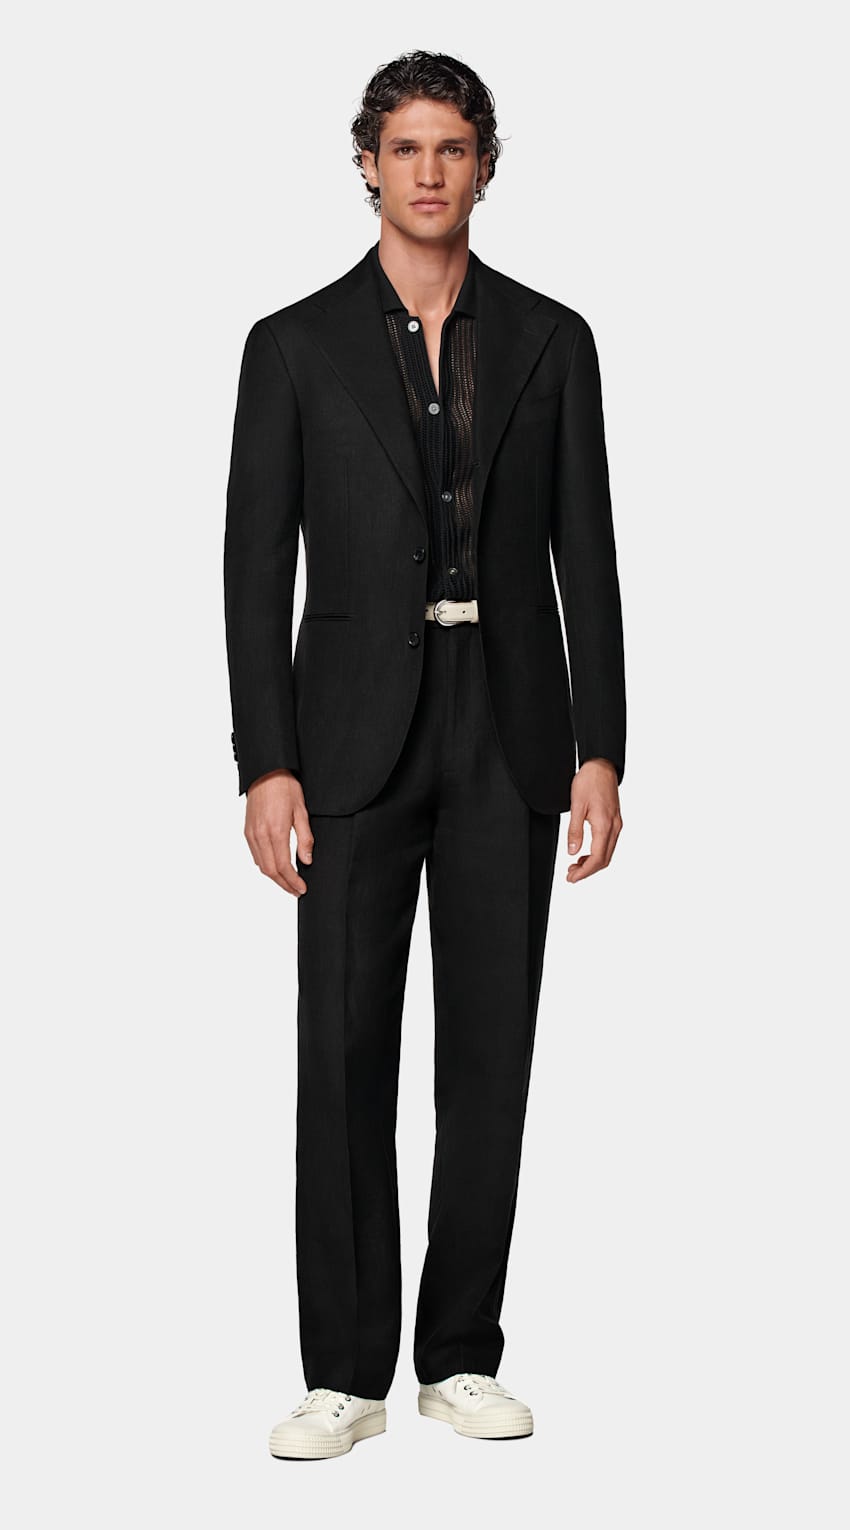 SUITSUPPLY All Season Pure Linen by Rogna, Italy Black Custom Made Suit